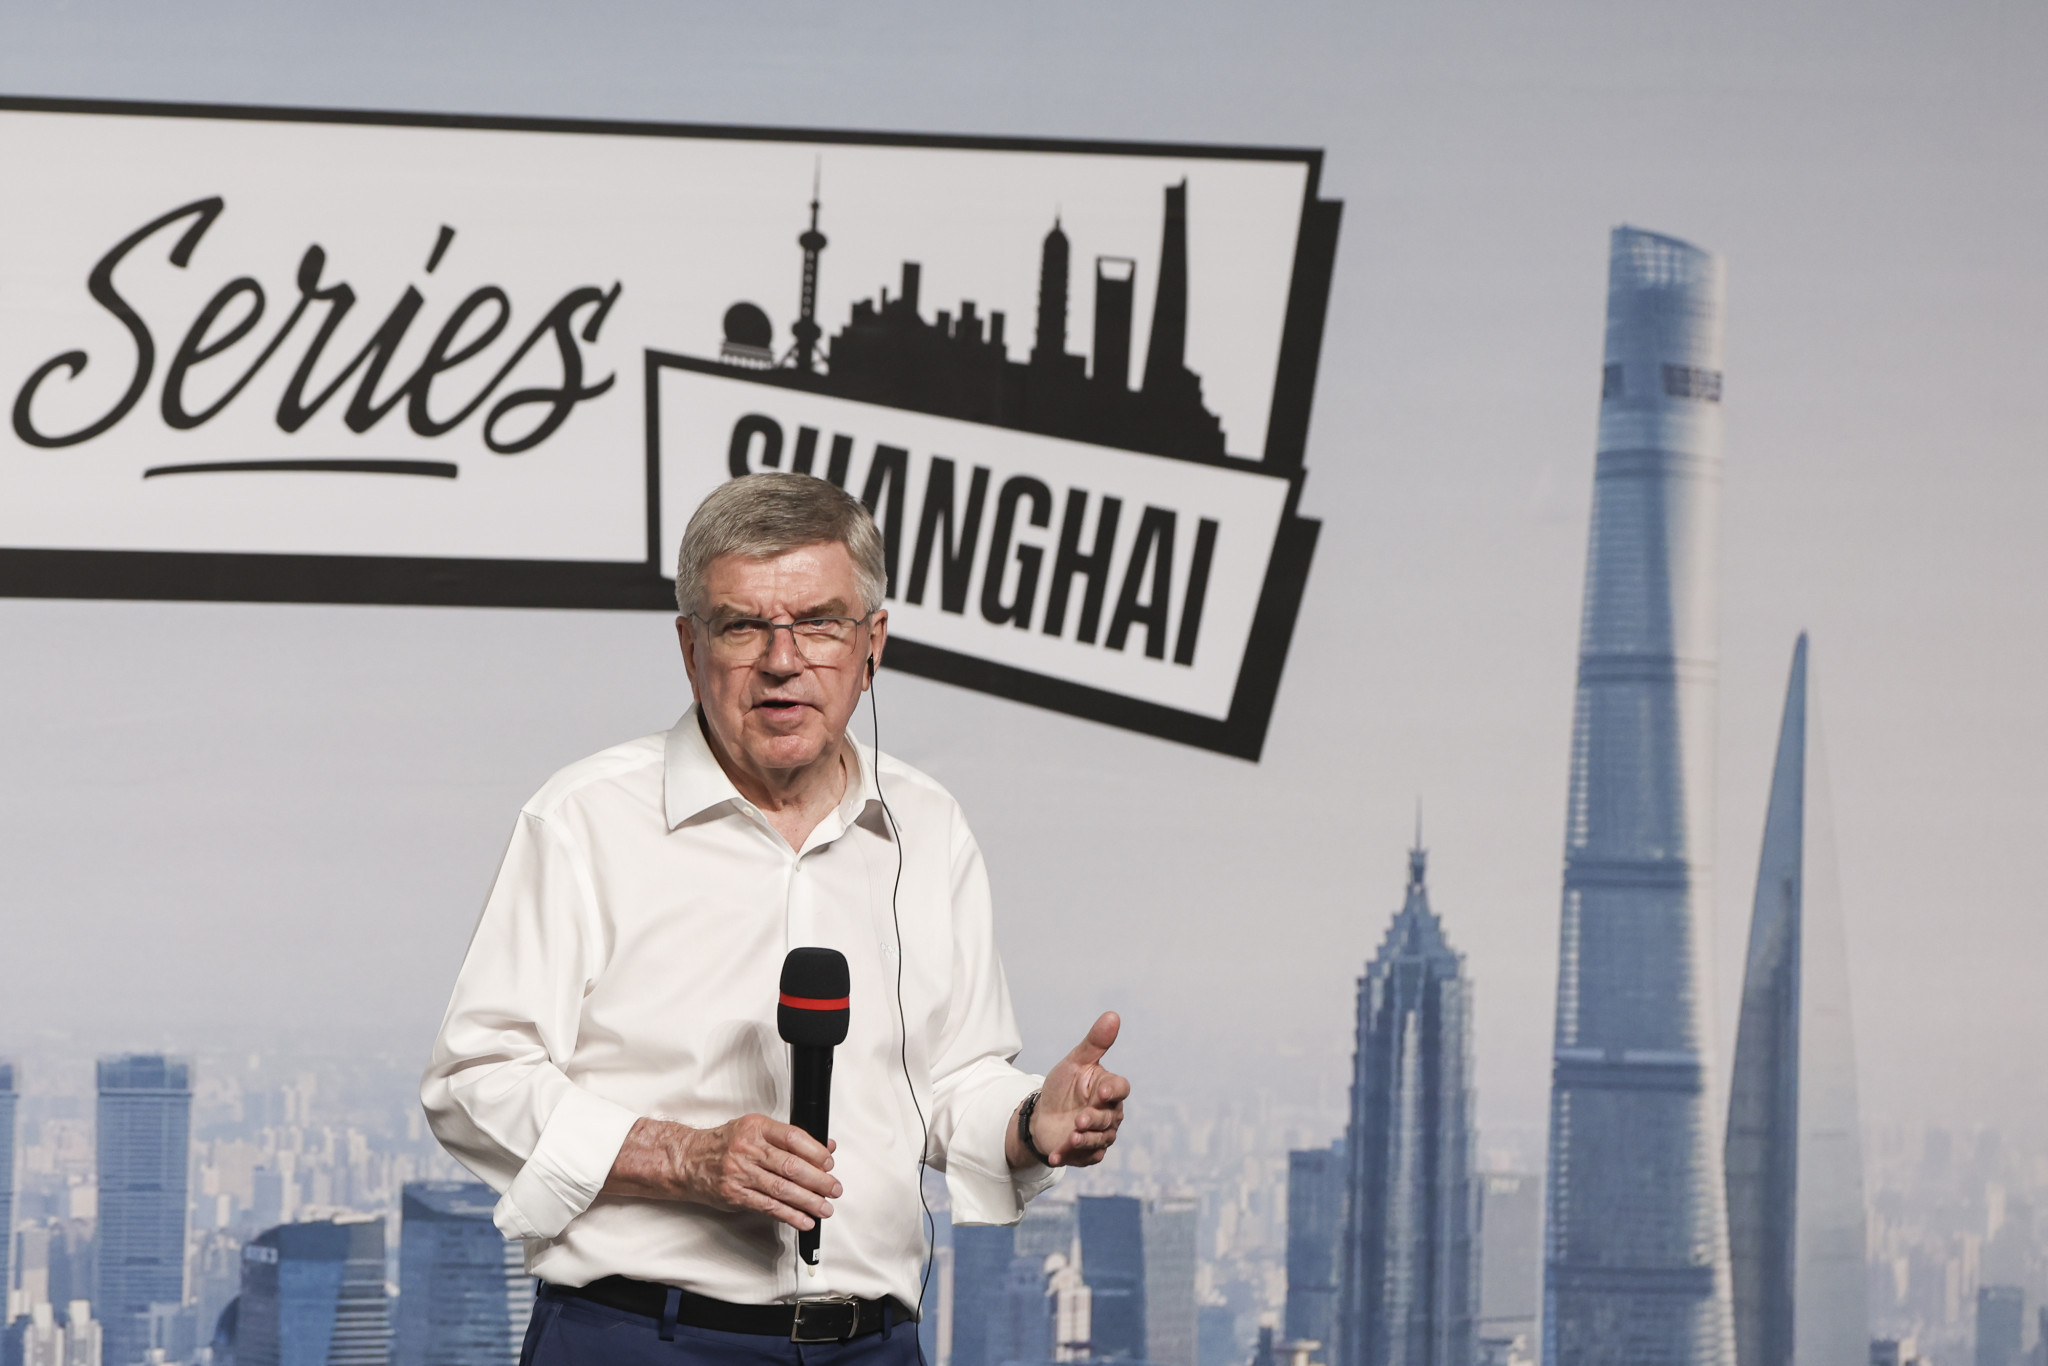 IOC president Thomas Bach during a press conference in Shanghai. GETTY IMAGES